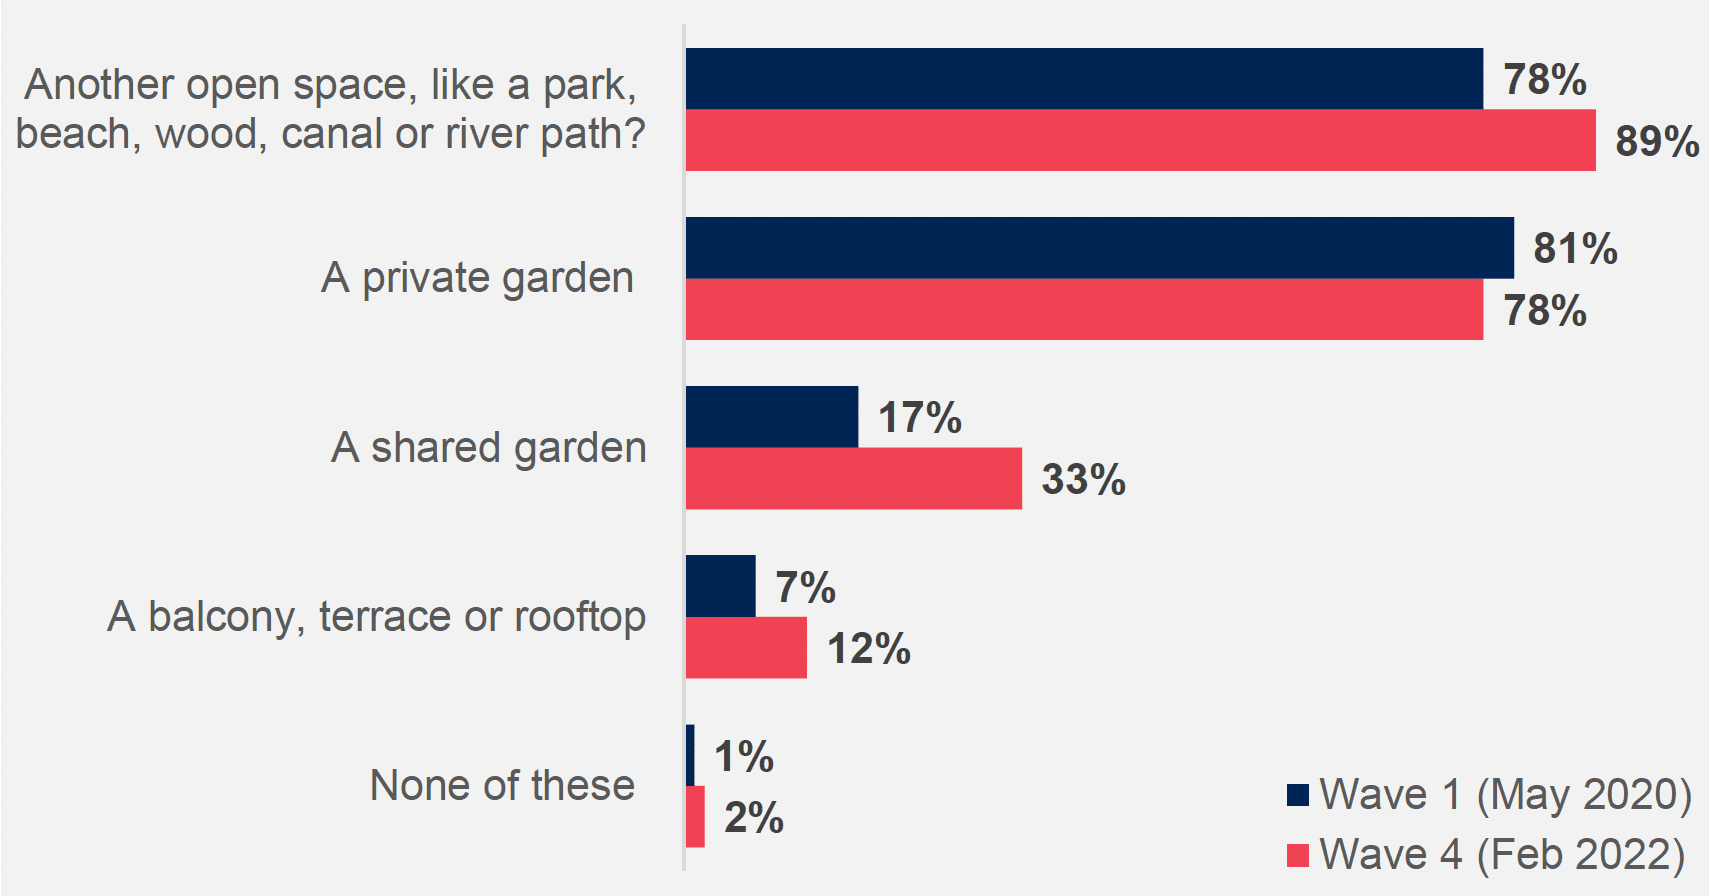 Bar chart showing access to different outdoor spaces, with 89% having access to open spaces like a park, beach or river path (up from 78% in wave one), and 33% a shared garden (up from 17% in wave one)